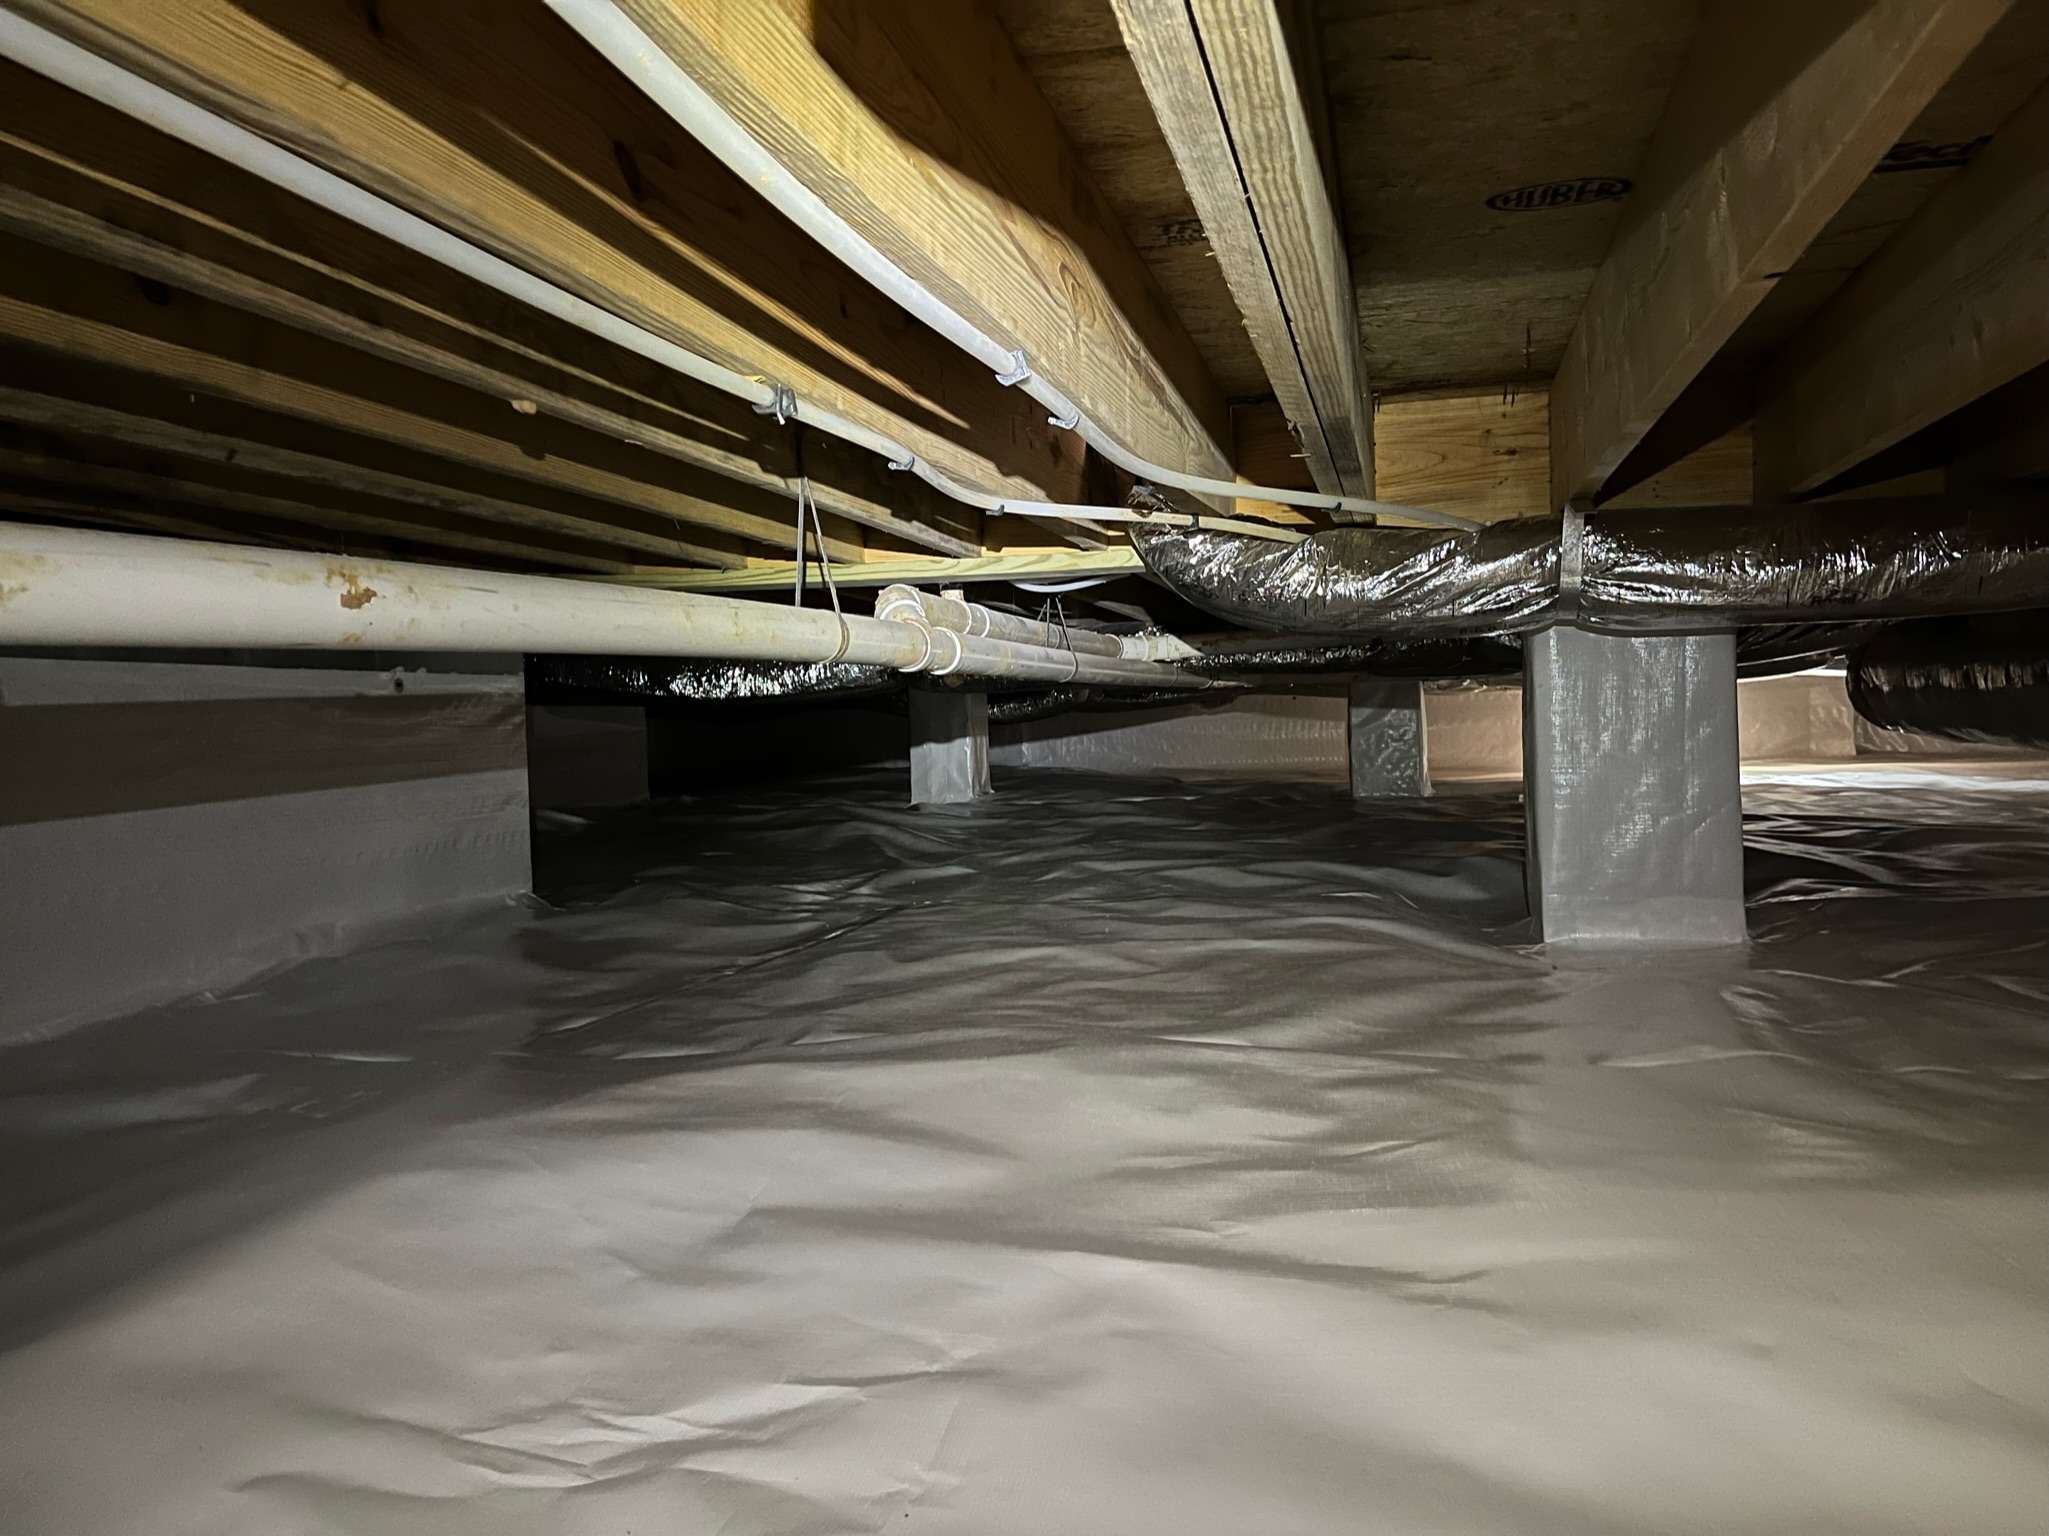 Crawl Space Encapsulation And Dehumidification In Asheville, Al A Comprehensive Humidity Solution (6)